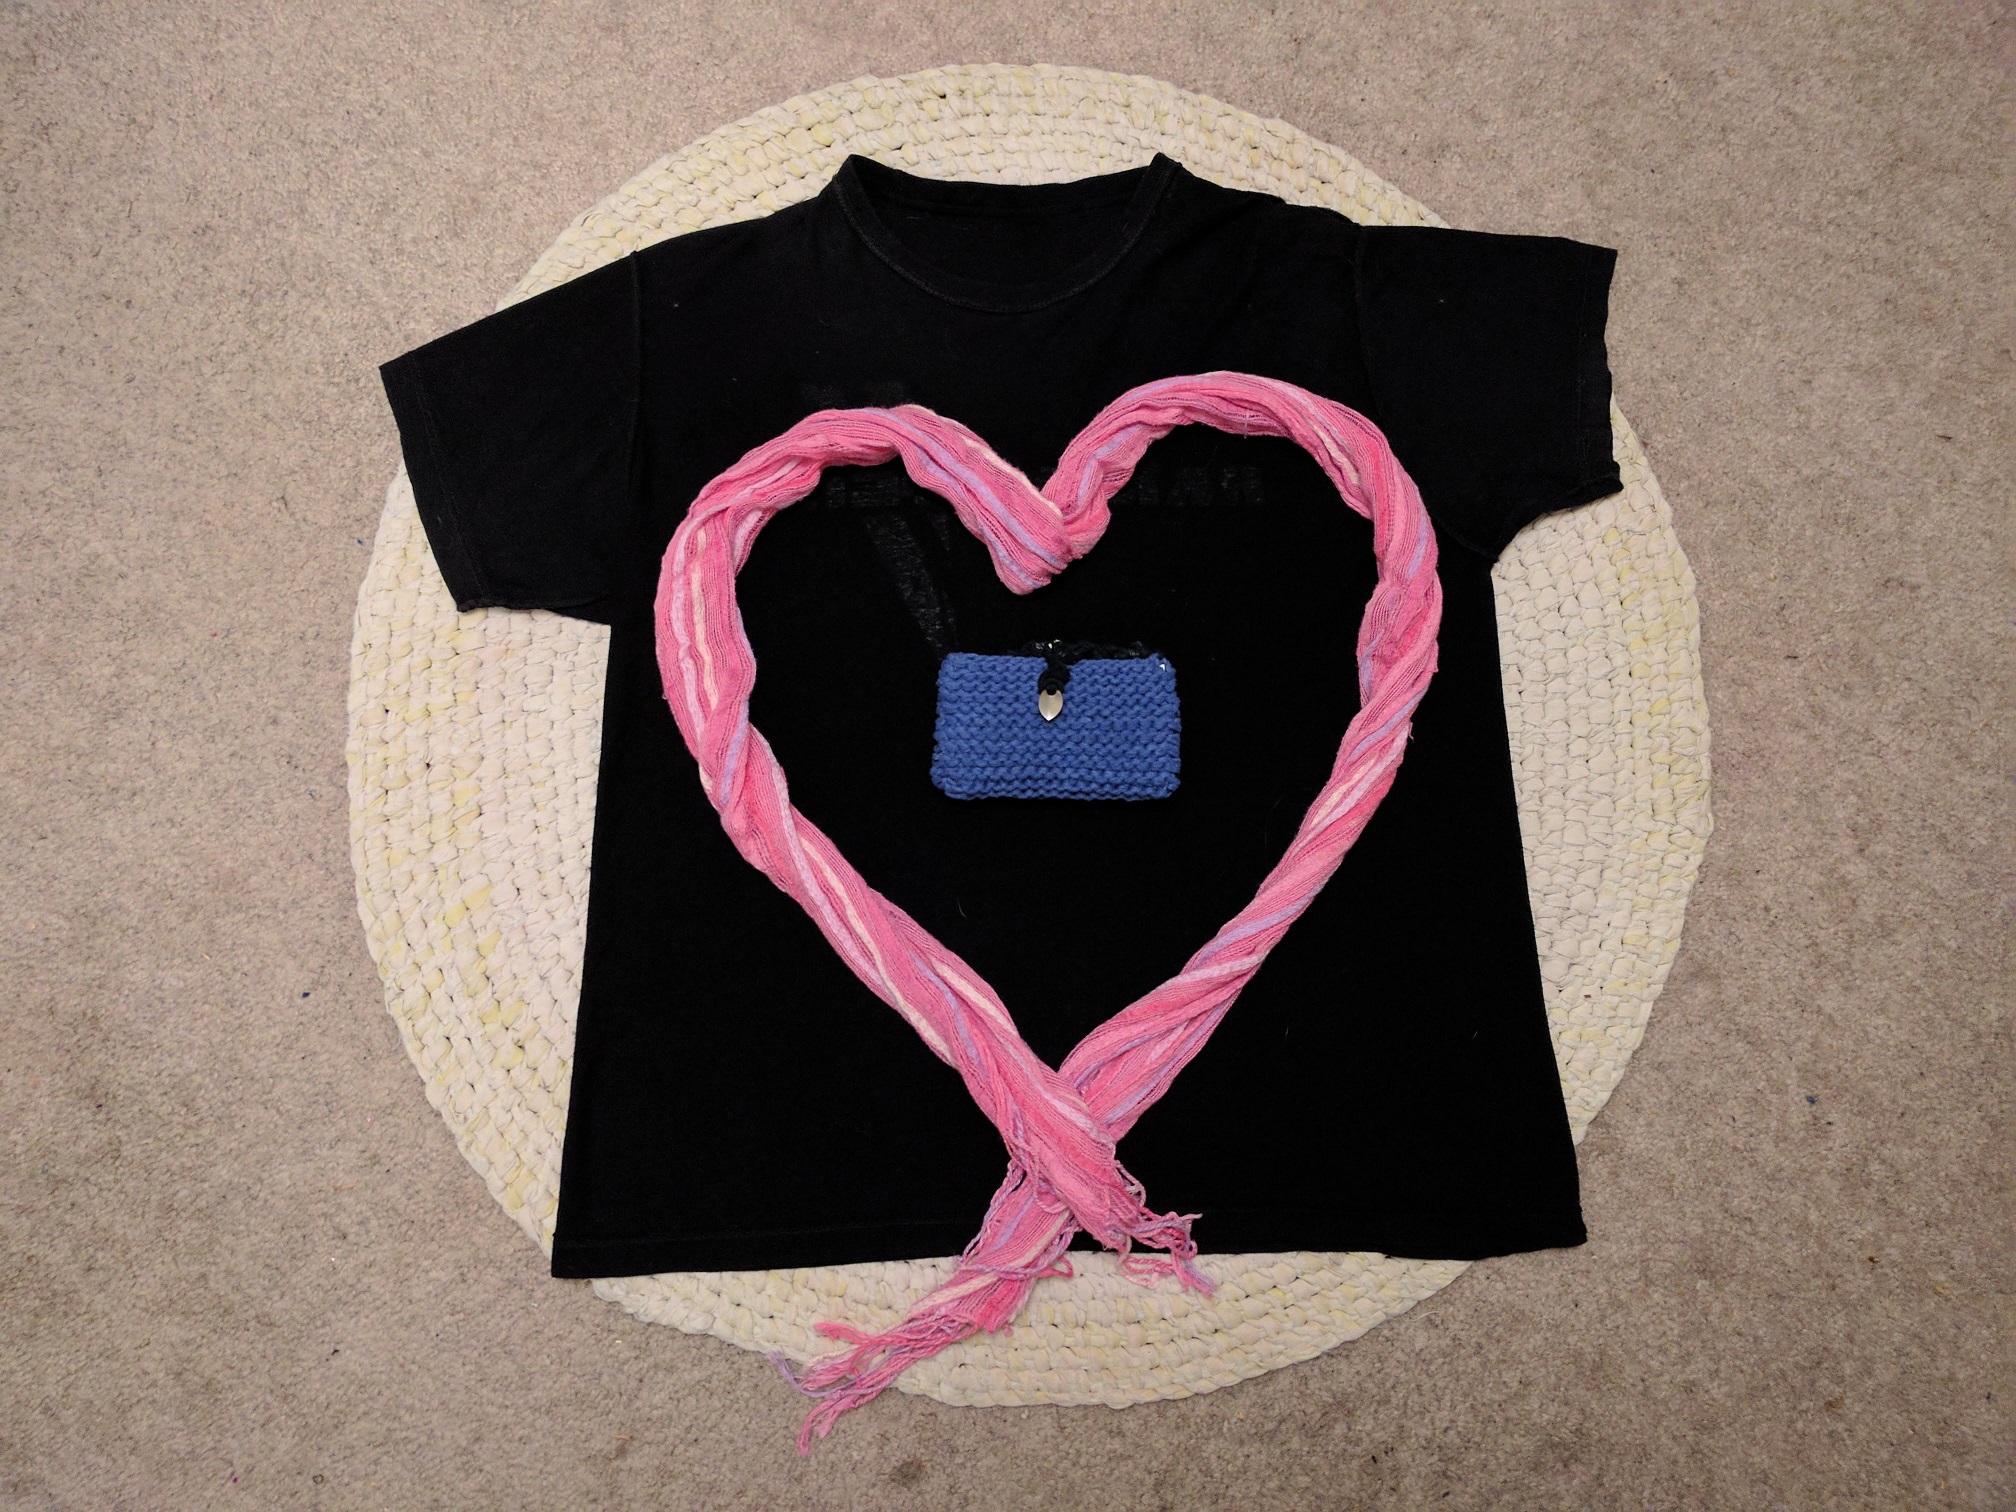 A tshirt with a pink heart and a knitted envelope in the middle.